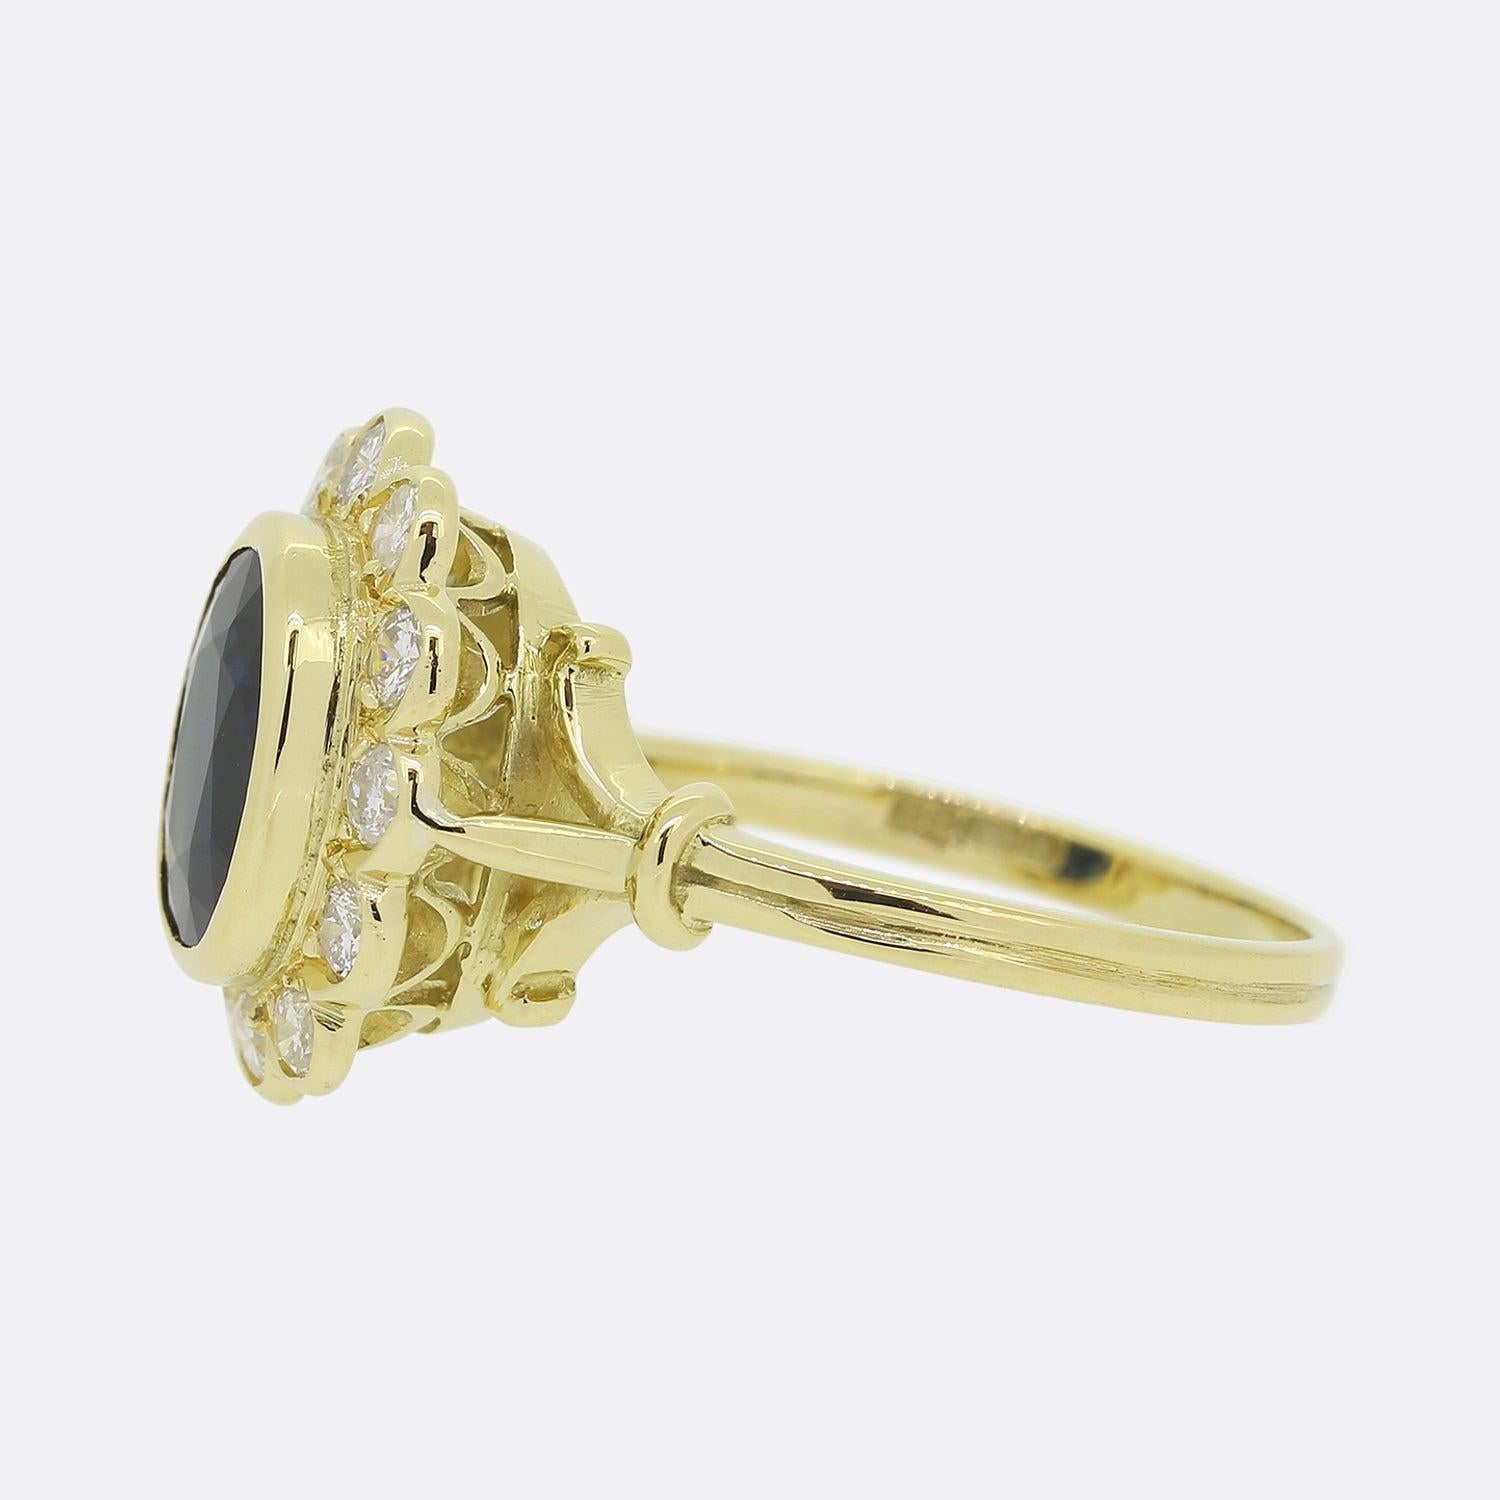 Here we have an 18ct yellow gold sapphire and diamond cluster ring. An oval shaped sapphire possessing a dark navy blue tone sits slightly risen in a rub-over setting at the centre of the face. This proud principle stone is then circulated and